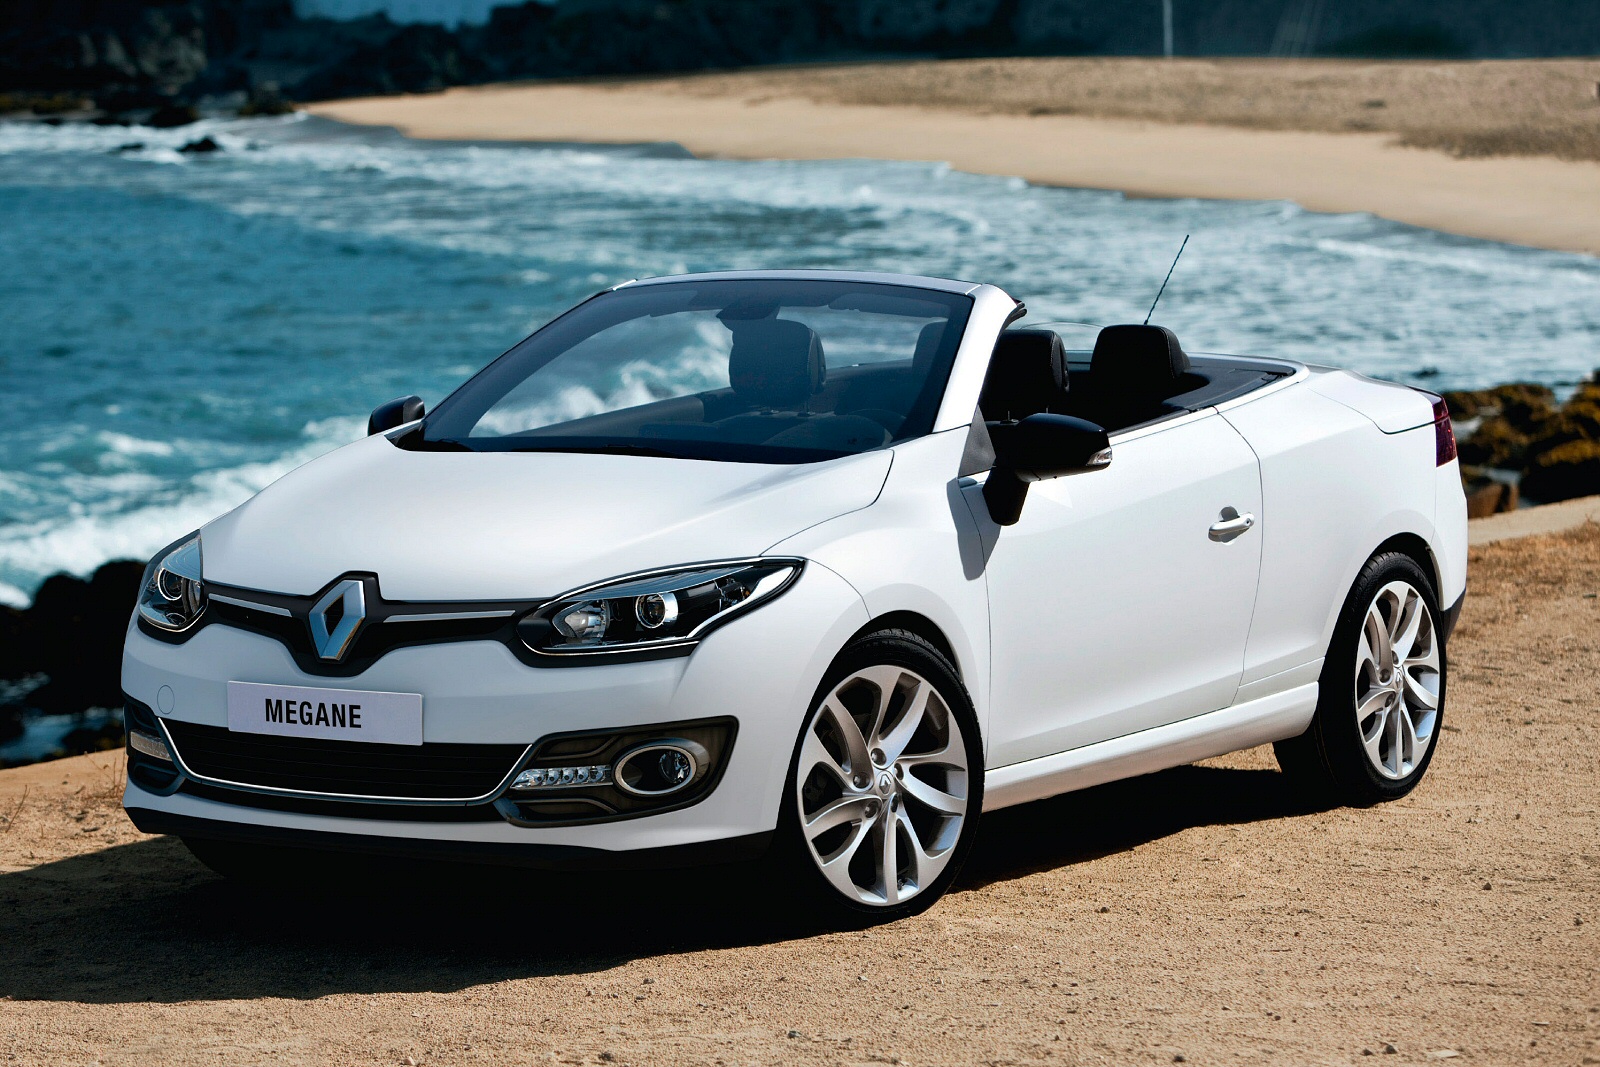 New Renault Megane Coupe Cabriolet